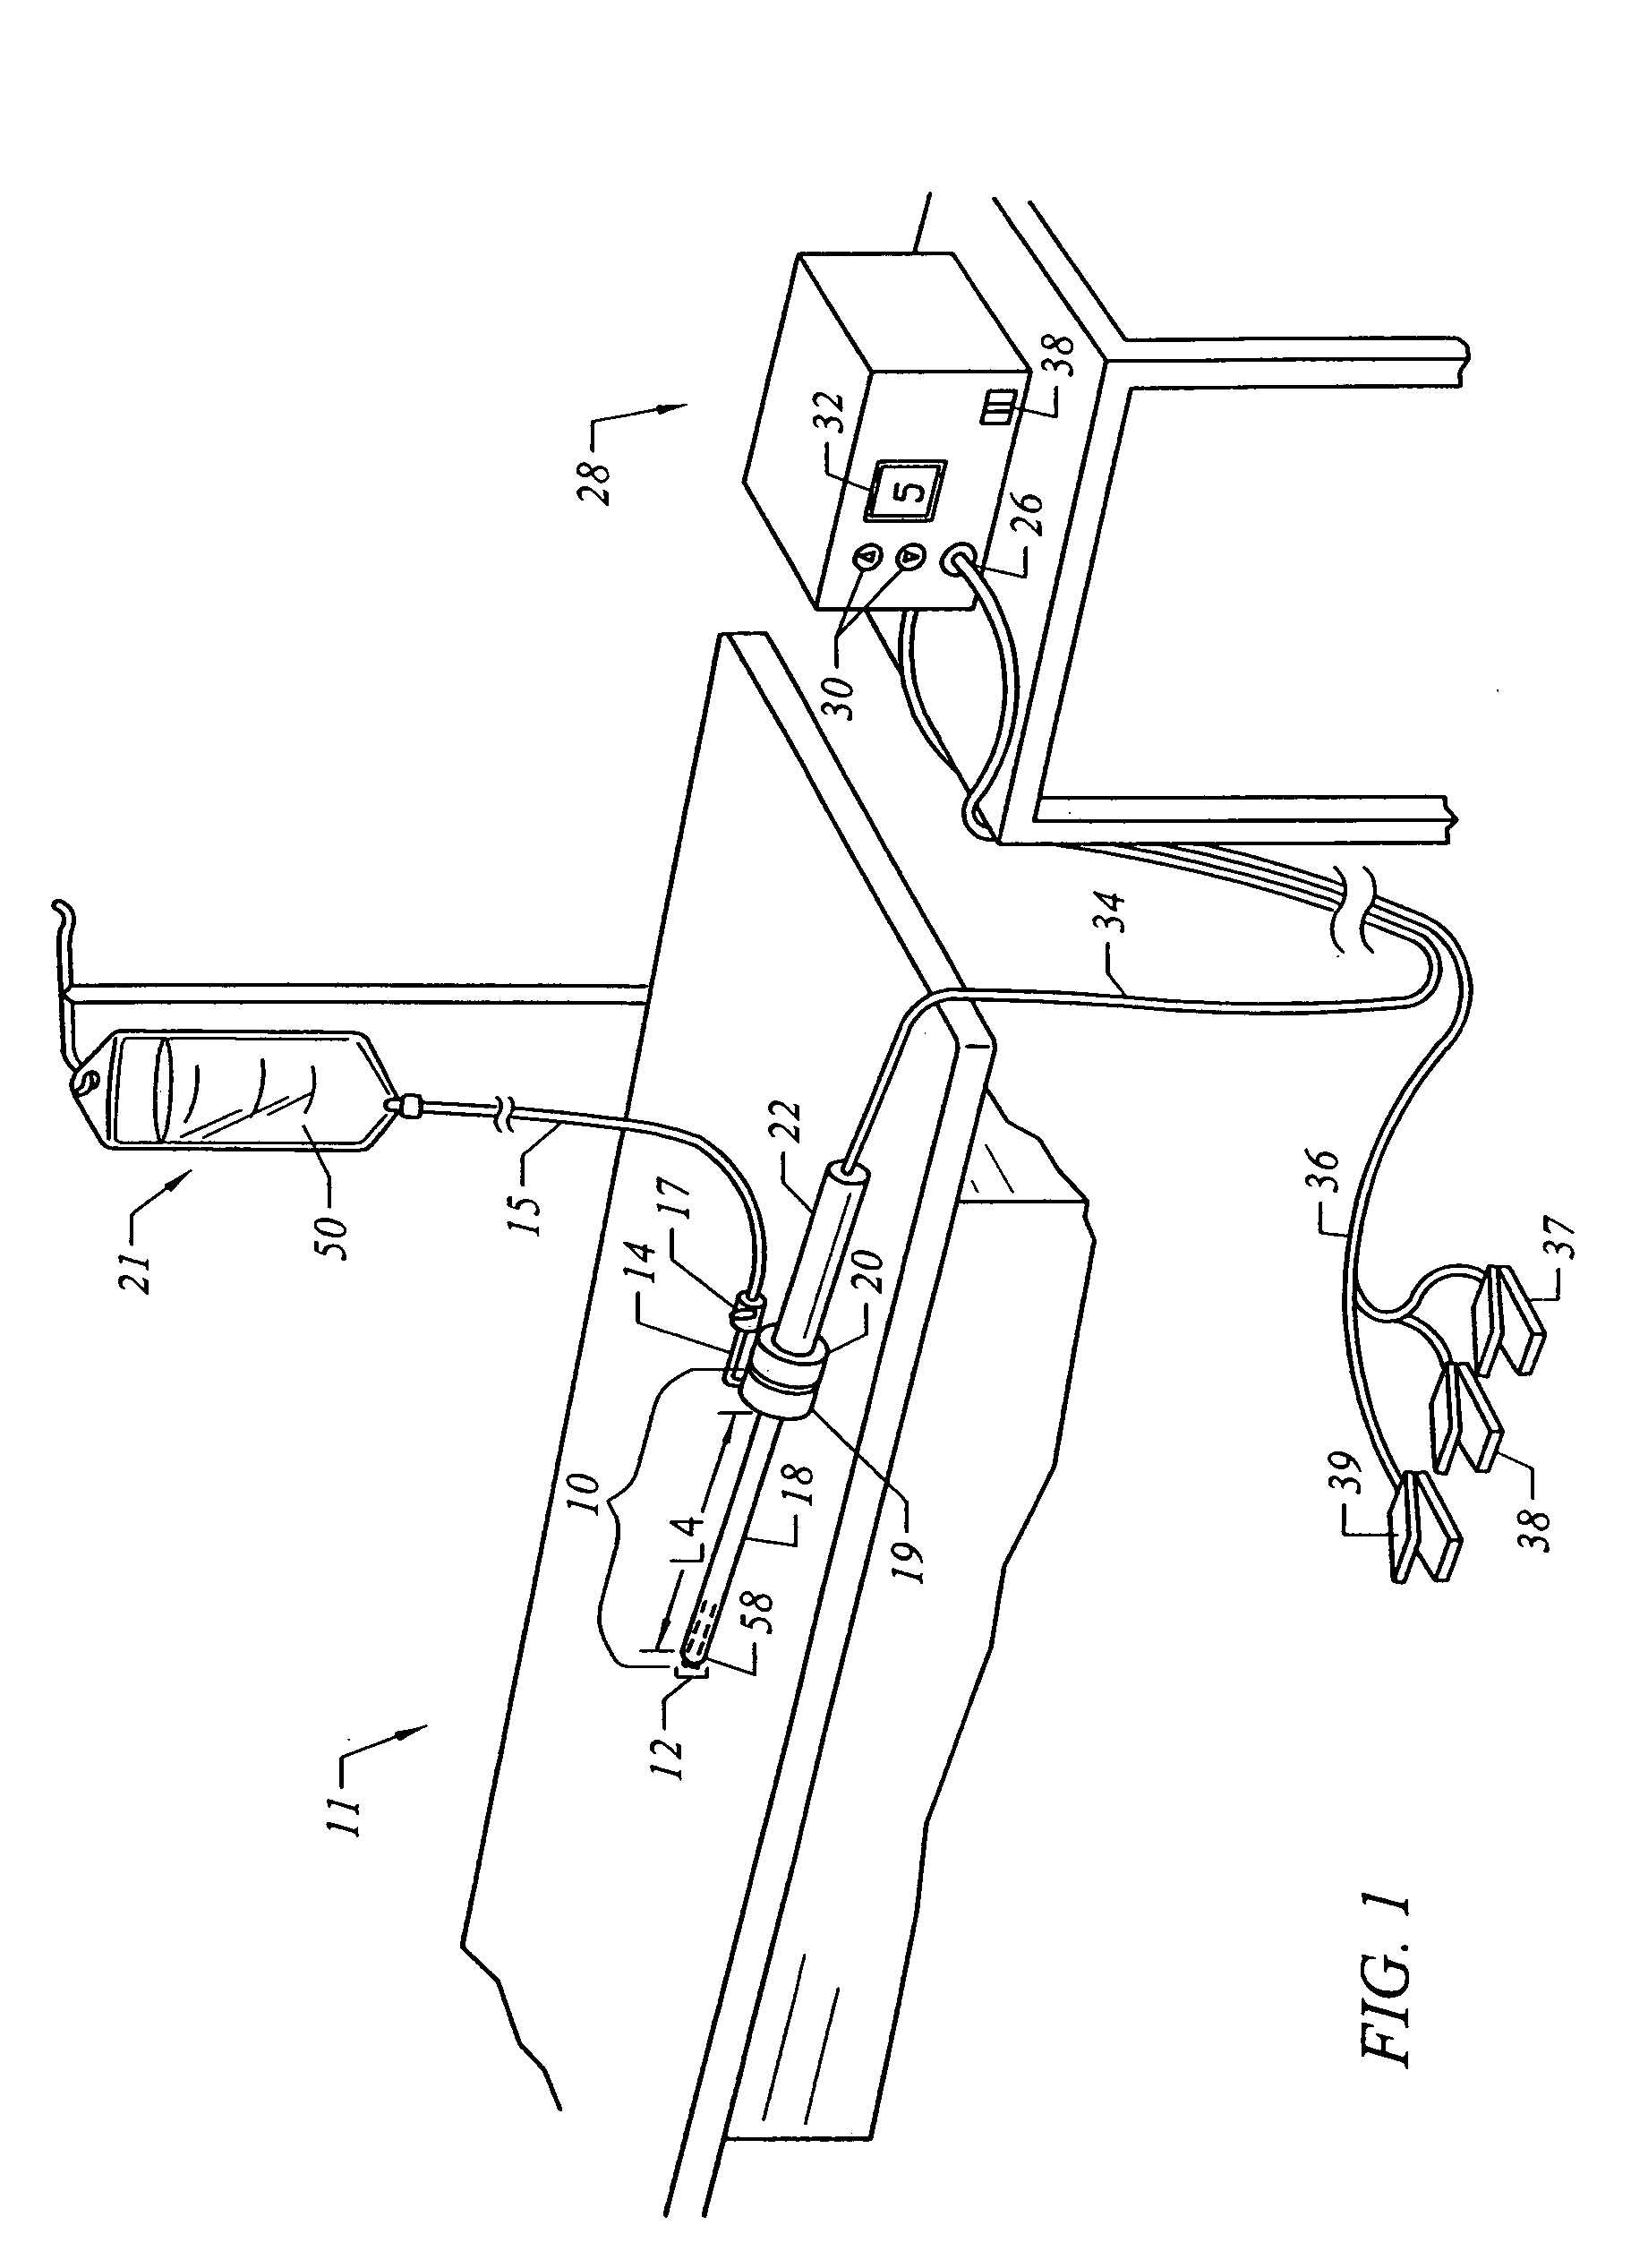 Bipolar electrosurgical clamp for removing and modifying tissue